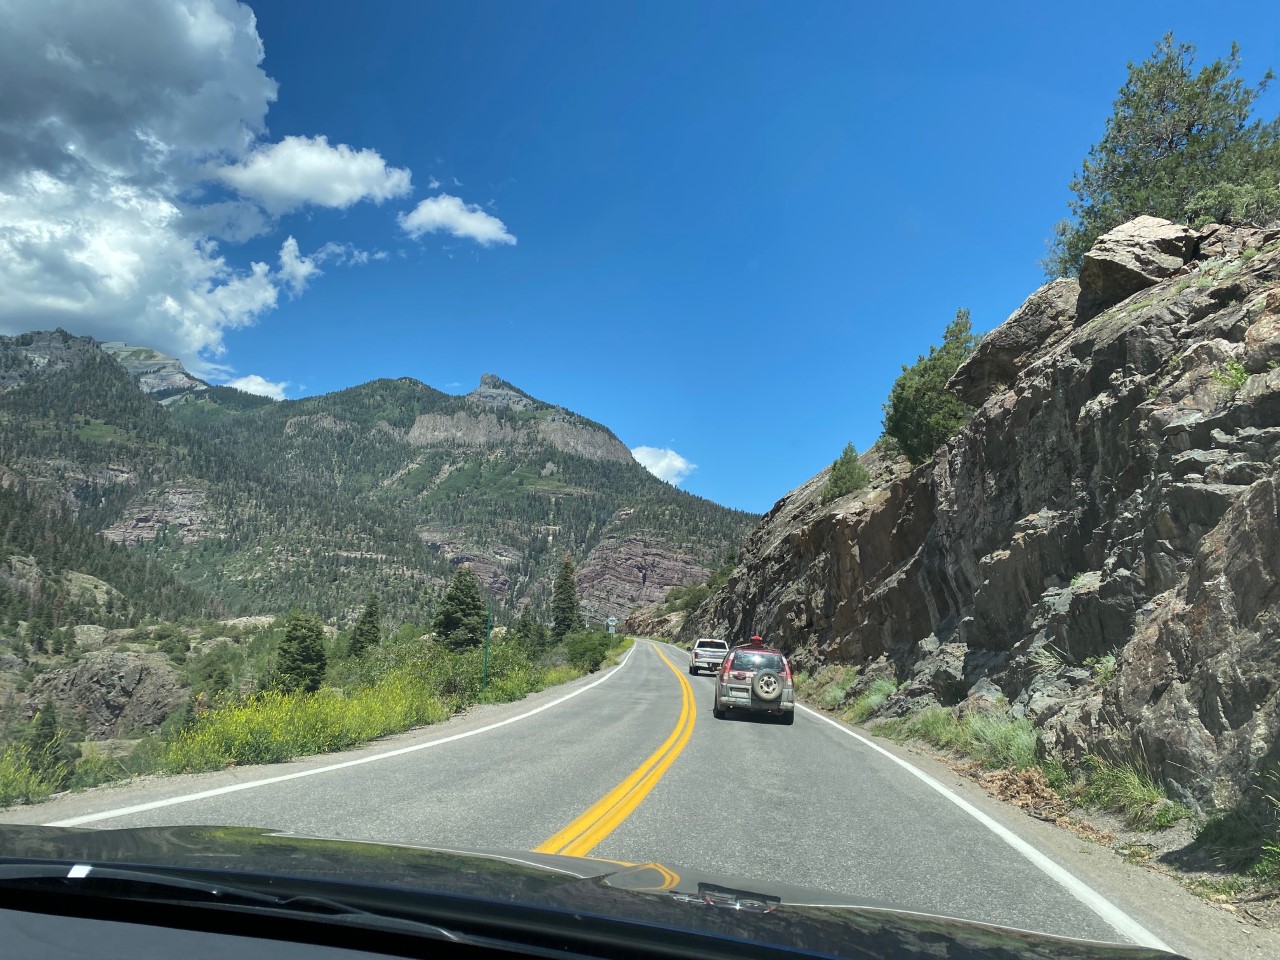 A little traffic as we wind our way to Ouray.